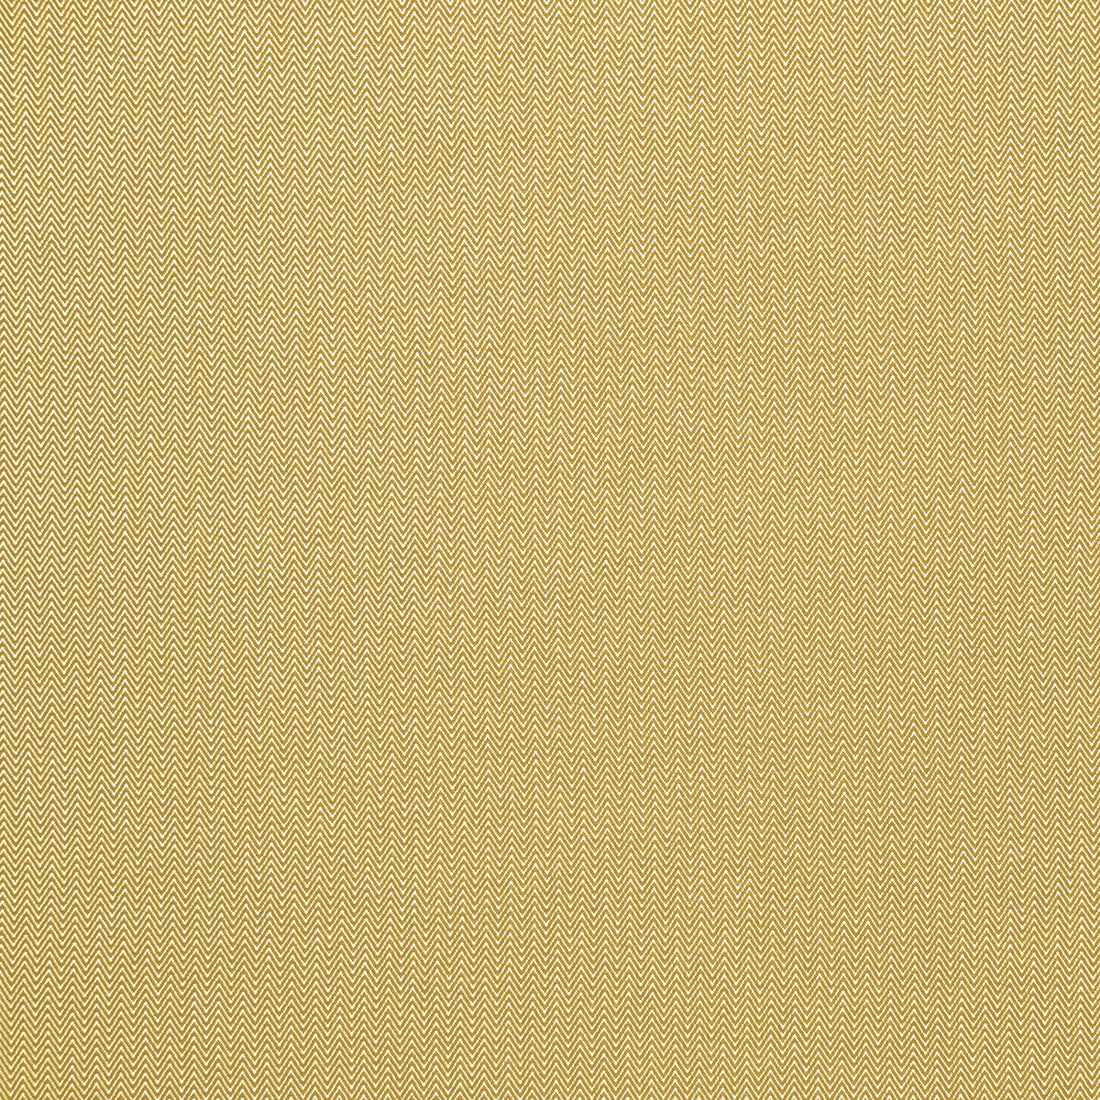 Donald fabric in amarillo color - pattern GDT5384.6.0 - by Gaston y Daniela in the Gaston Africalia collection